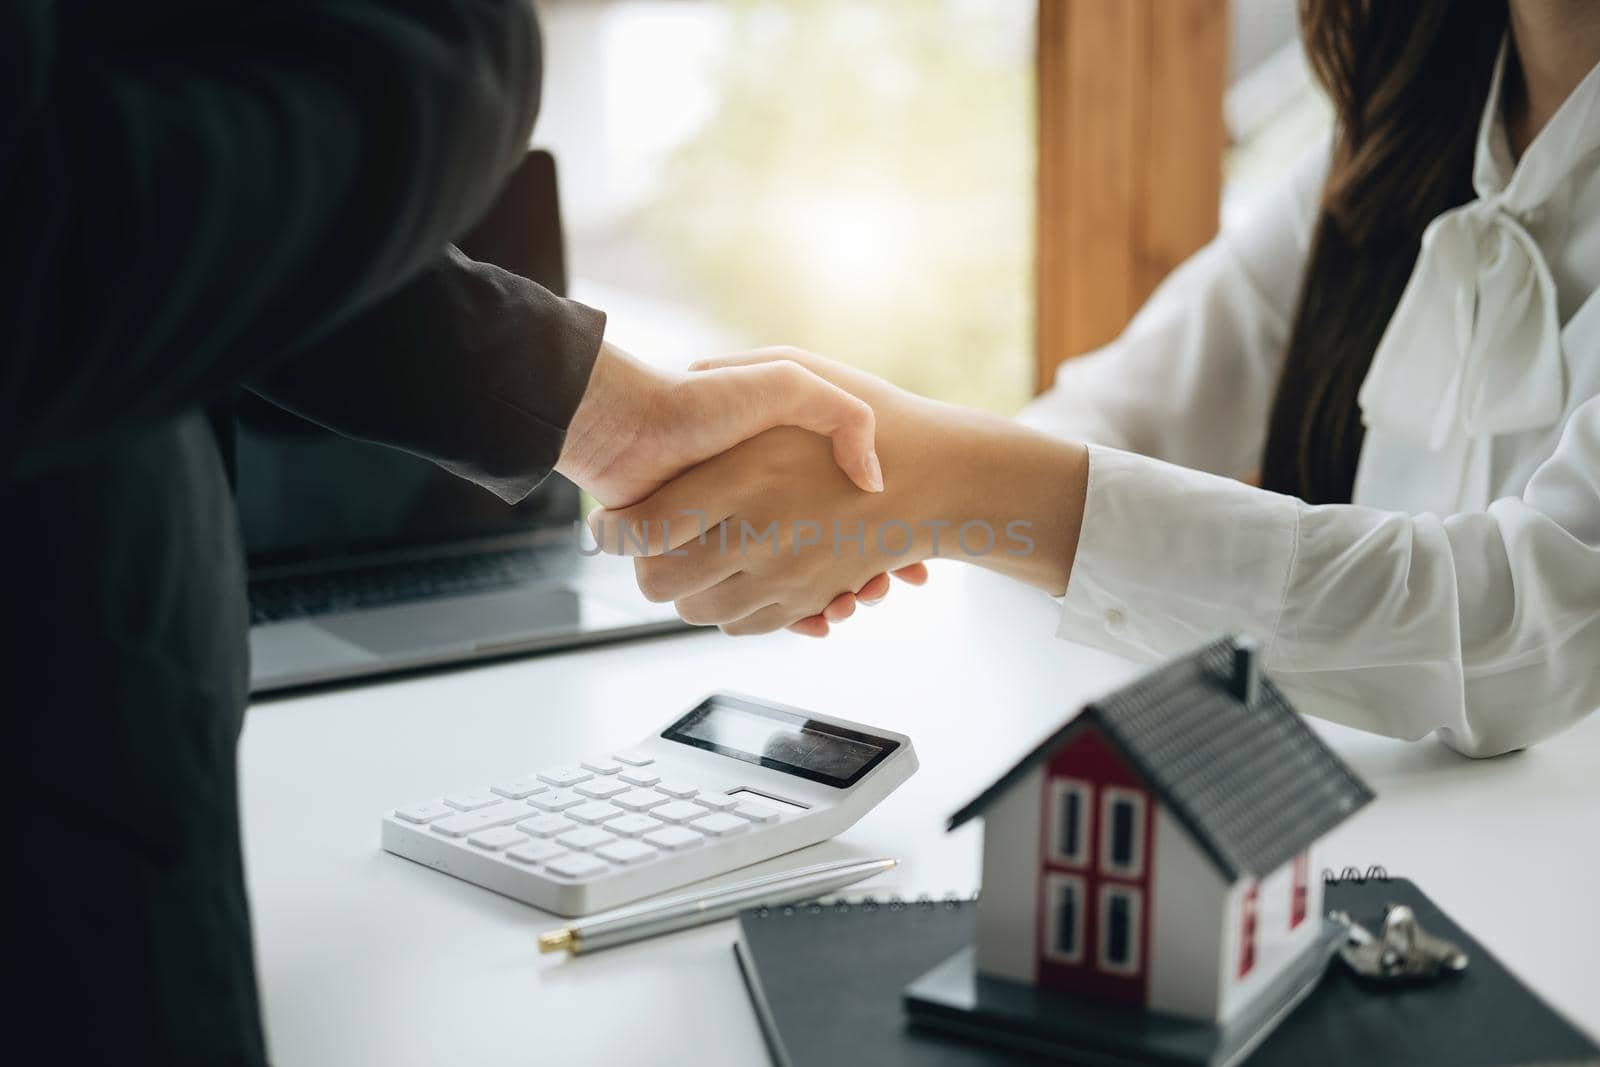 Guarantees, Mortgages, Signings, Insurance, contract, agreement concept, Real Estate Agents are shaking hands with customers to congratulate them after landing a deal.